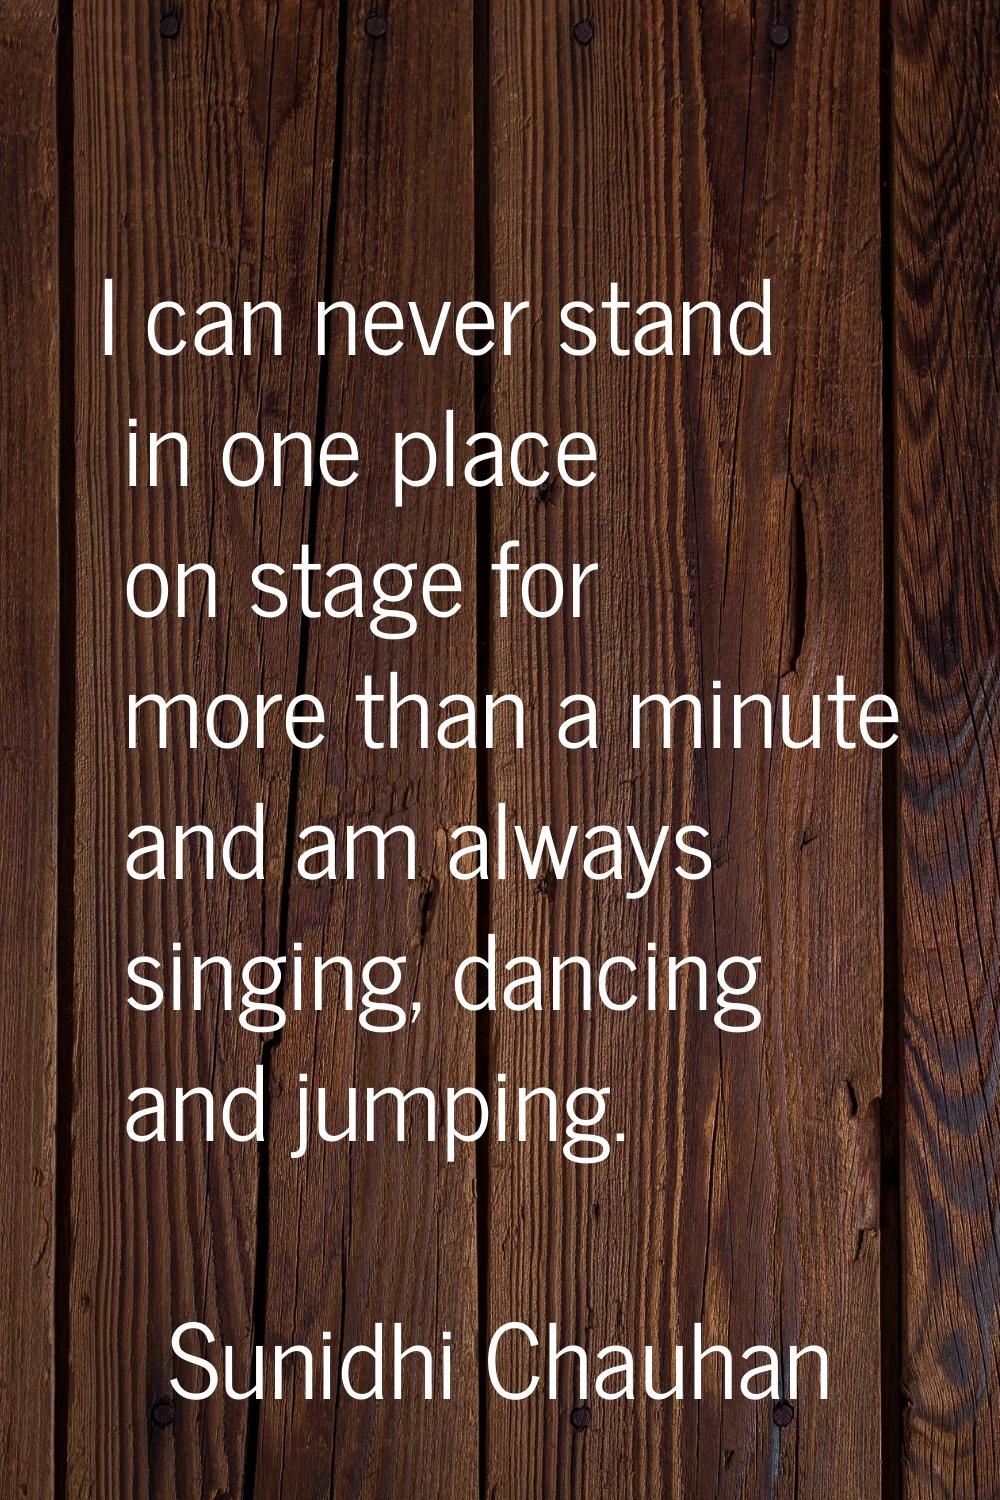 I can never stand in one place on stage for more than a minute and am always singing, dancing and j